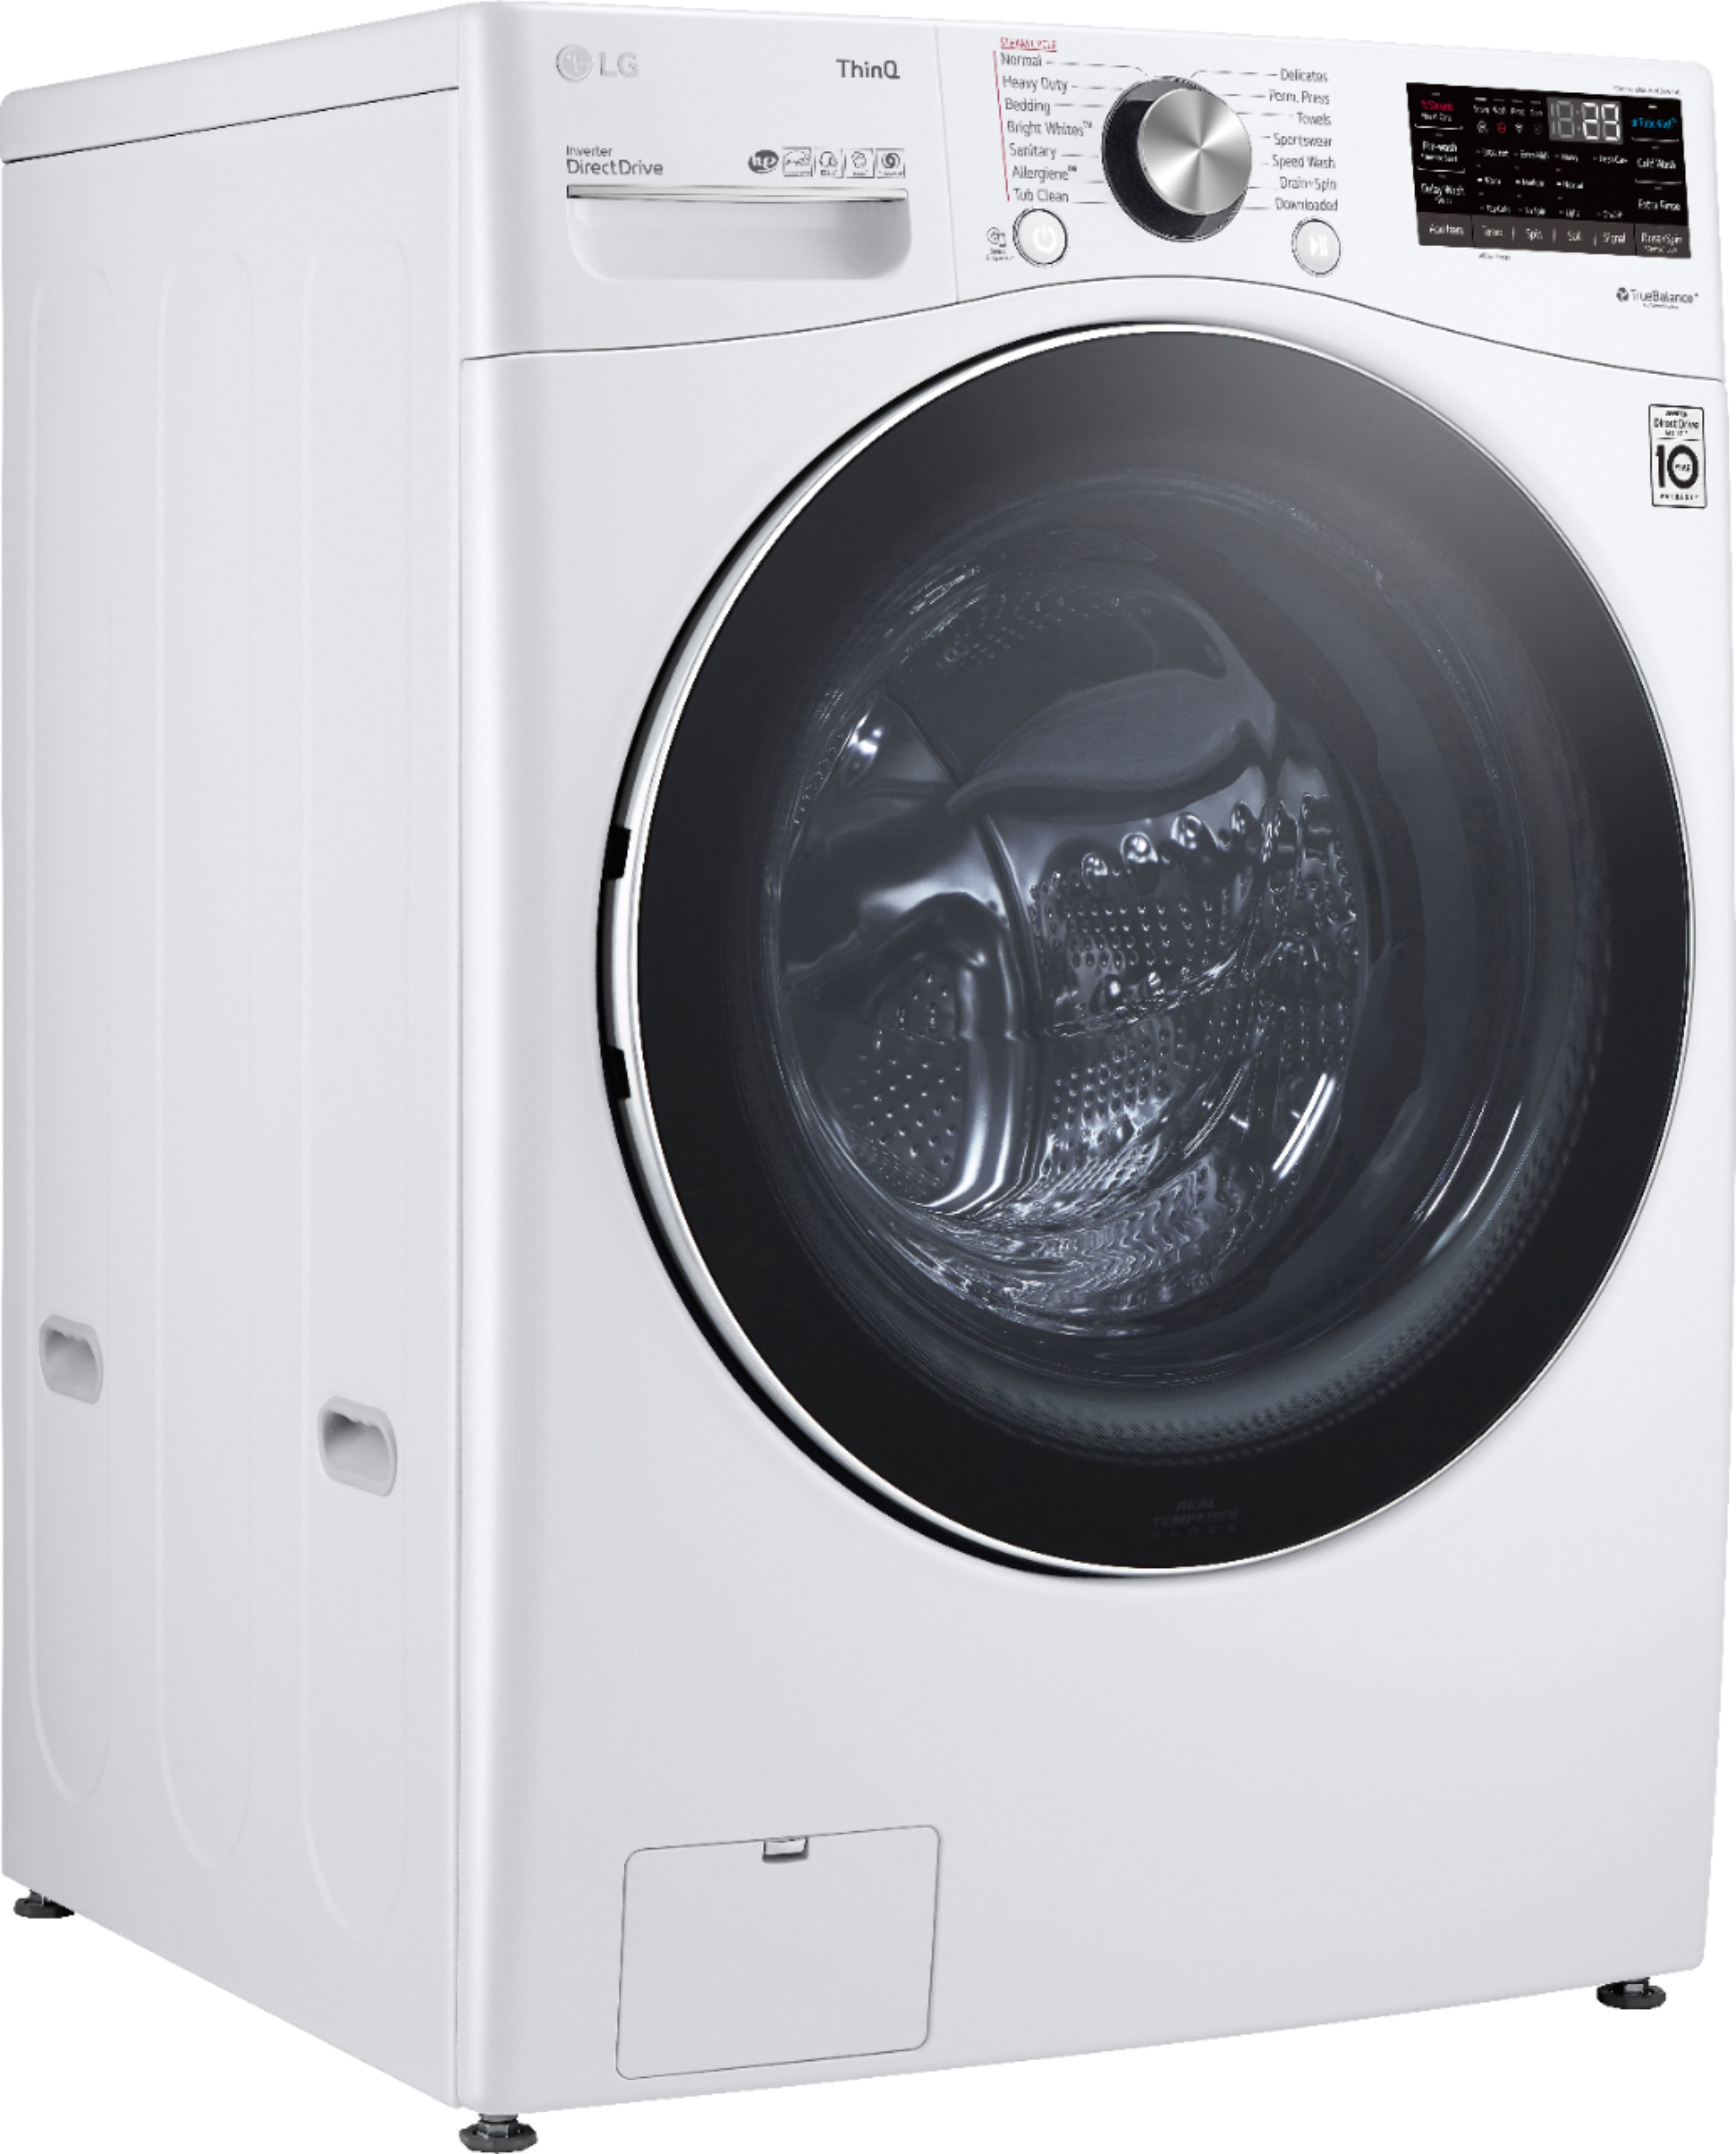 Angle View: LG - 5.0 Cu. Ft. High-Efficiency Stackable Smart Front Load Washer with Steam and Built-In Intelligence - White